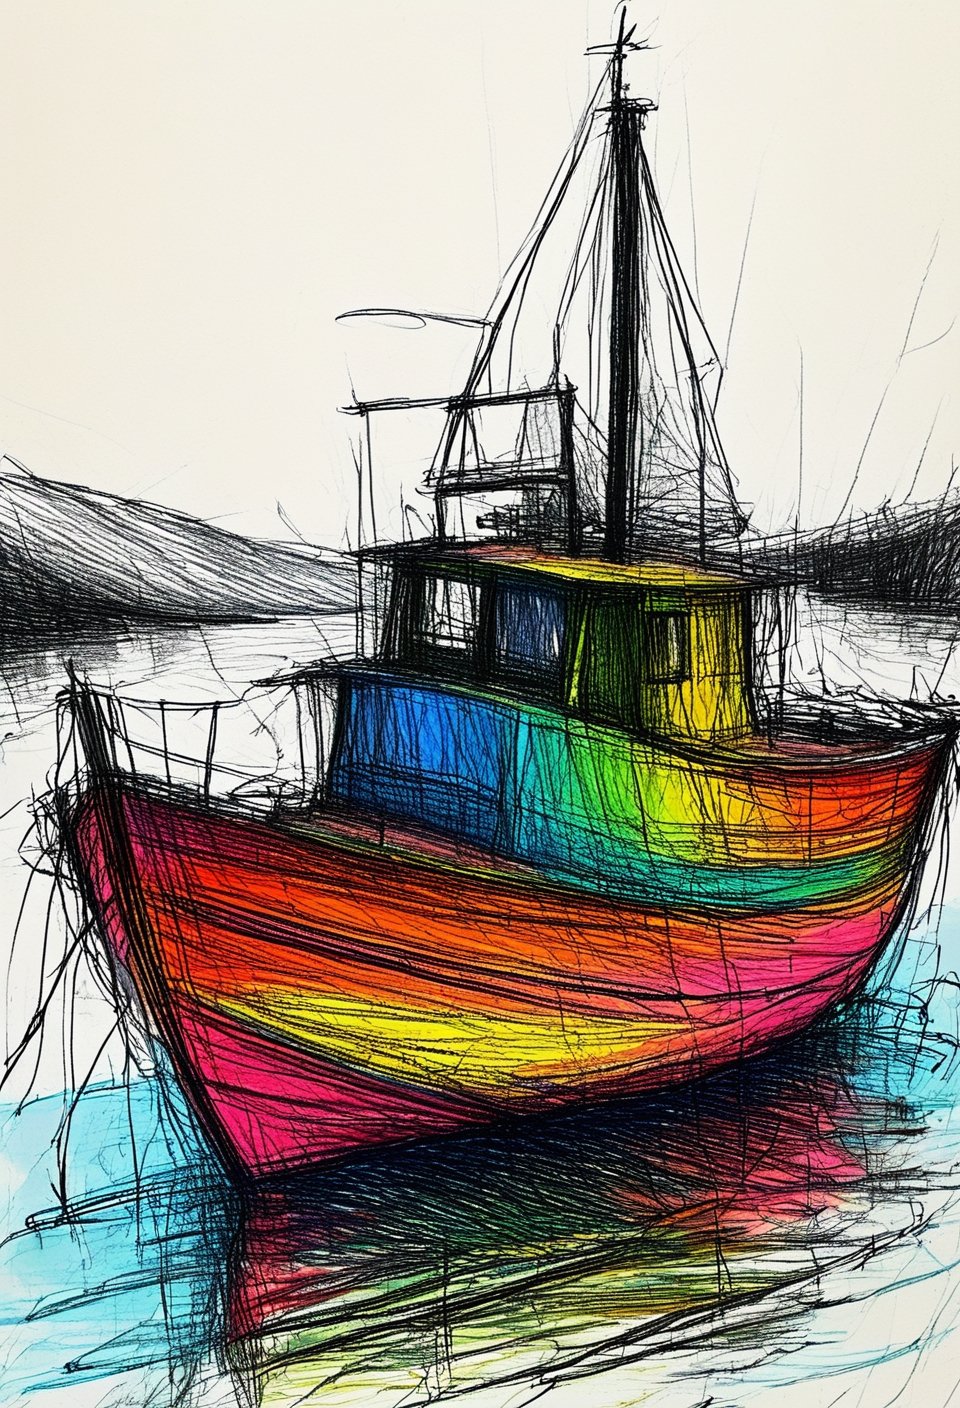 color mdsktch sketch of a boat on the water in a loch